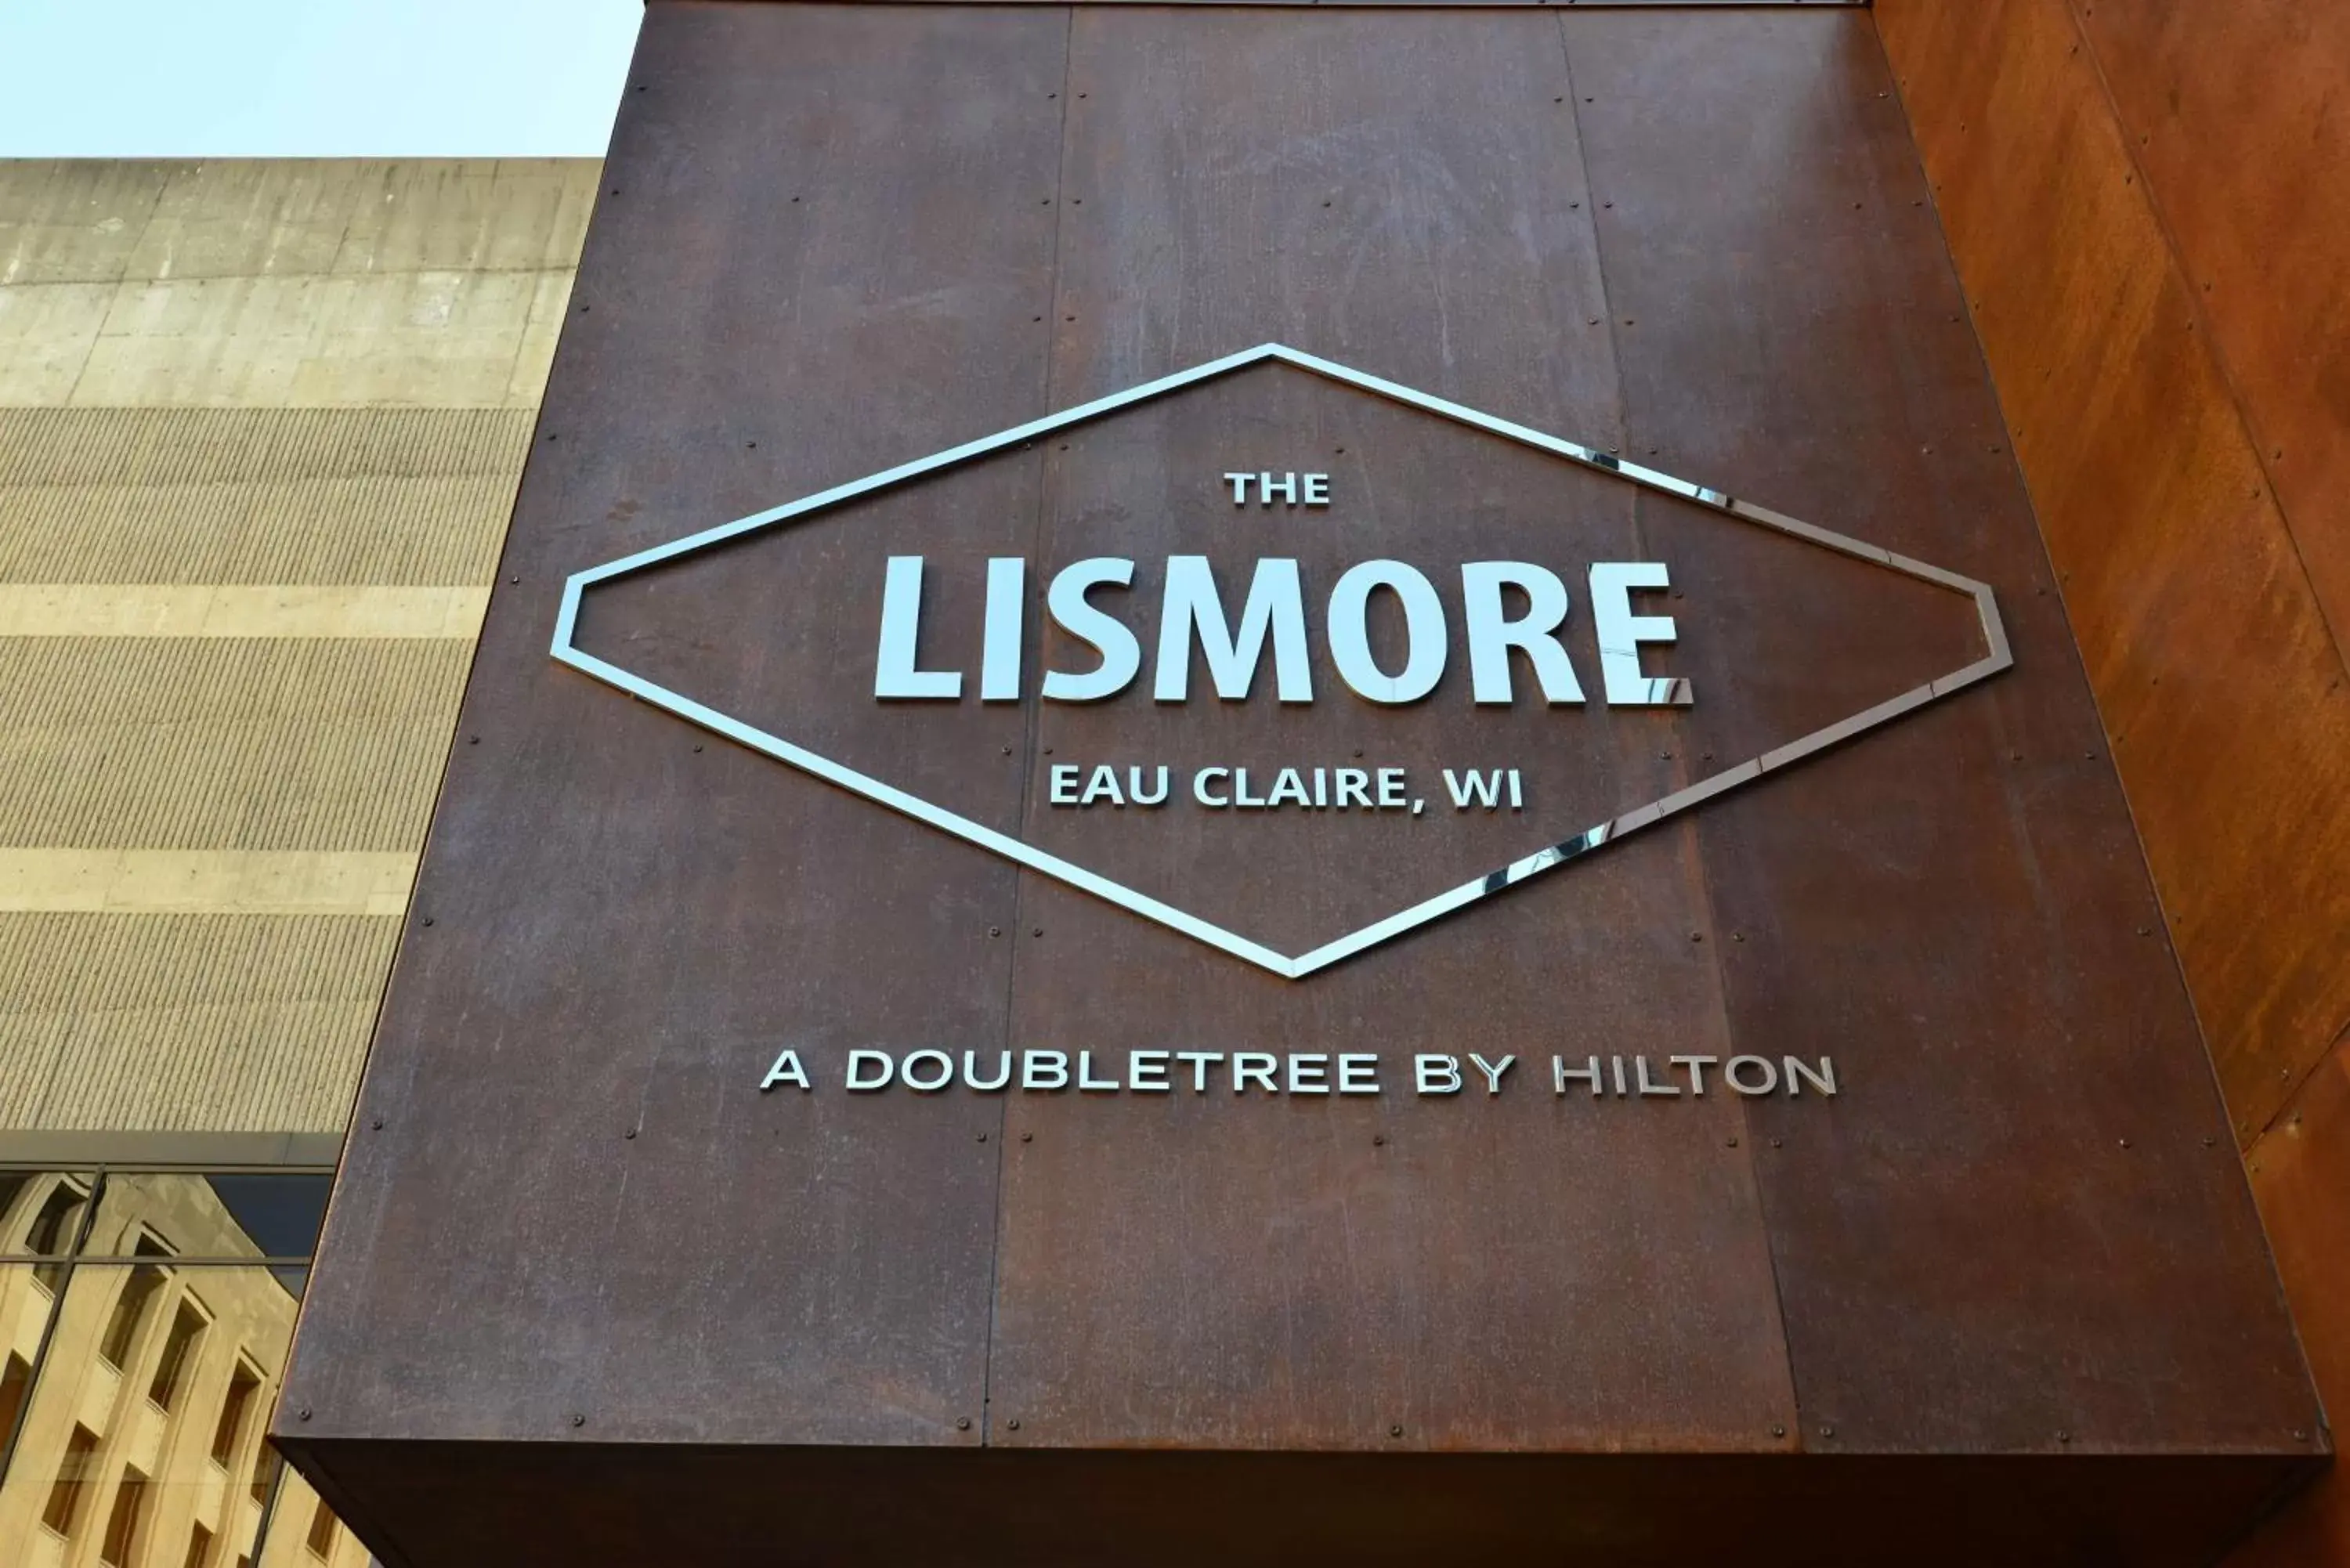 Property building in The Lismore Hotel Eau Claire - a DoubleTree by Hilton